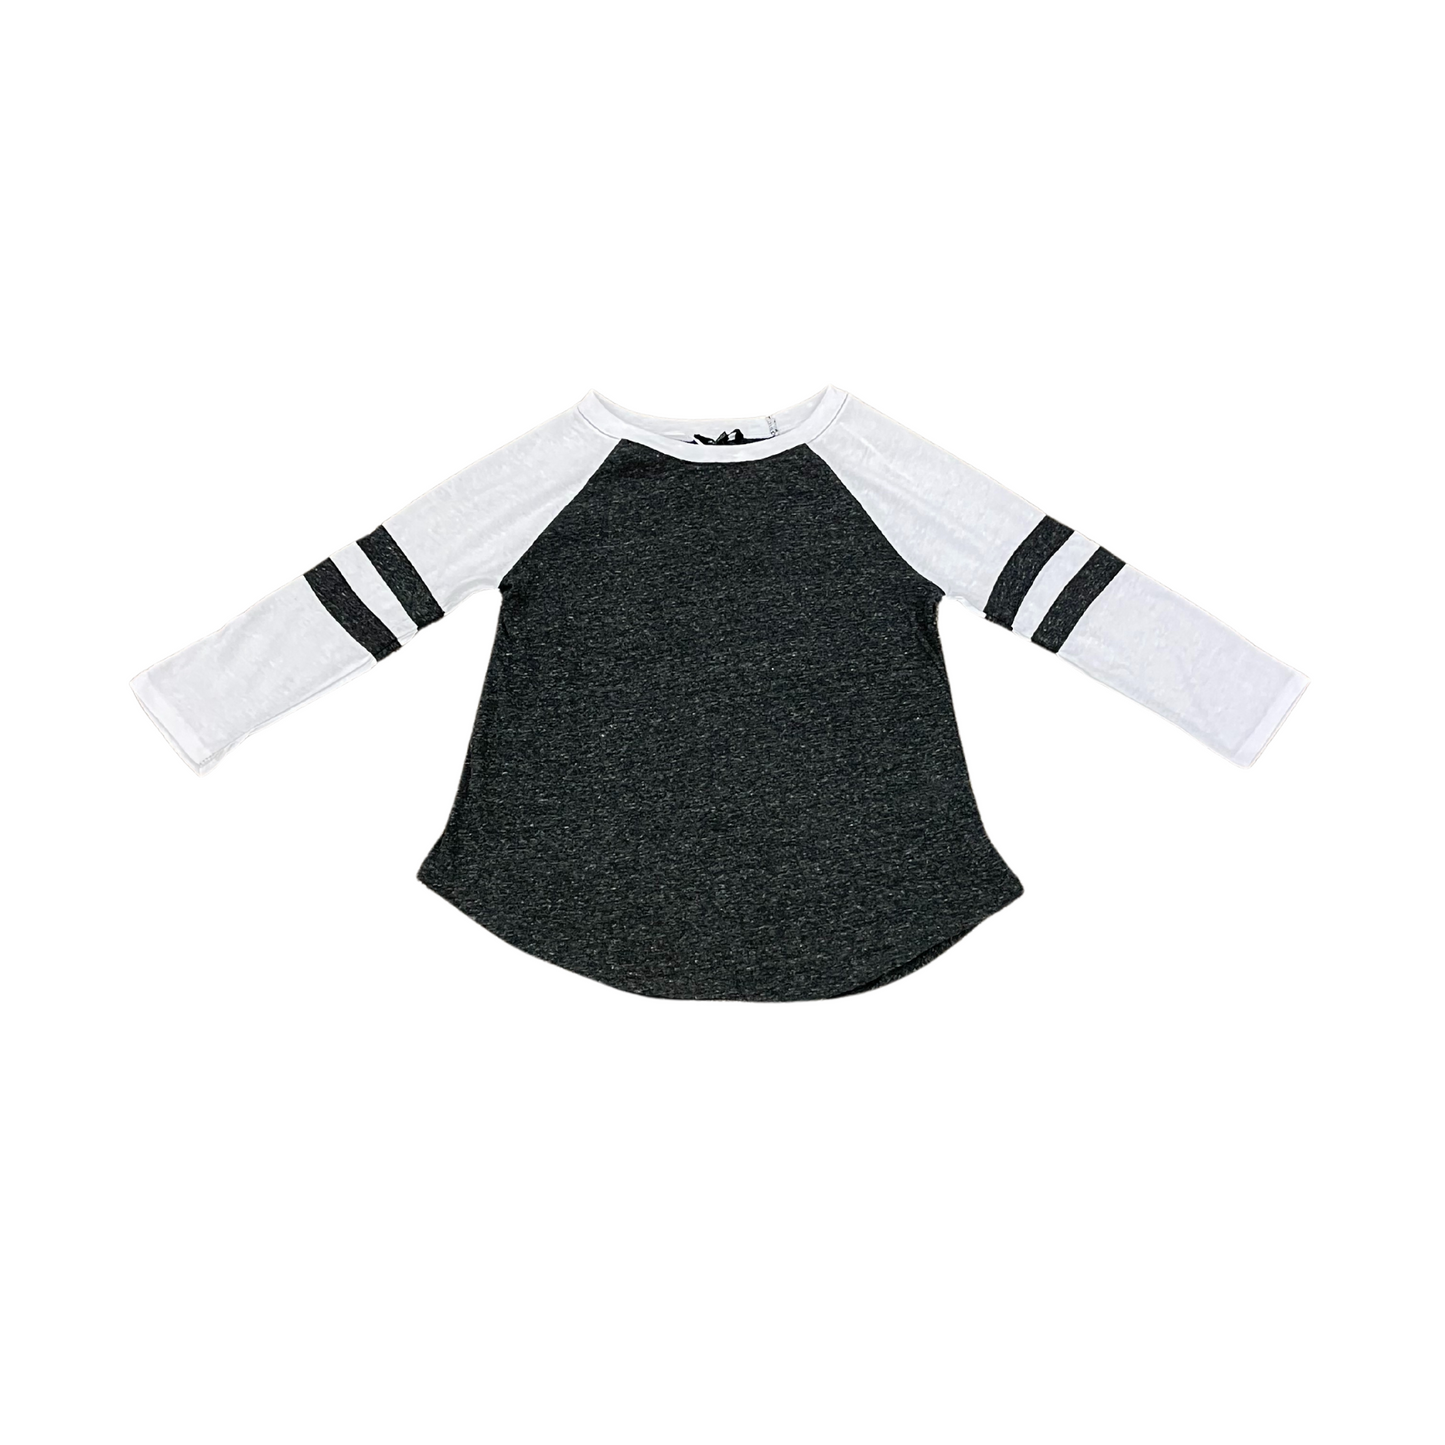 Ambiance Baseball Tee 5 Colors! (Size S-L)